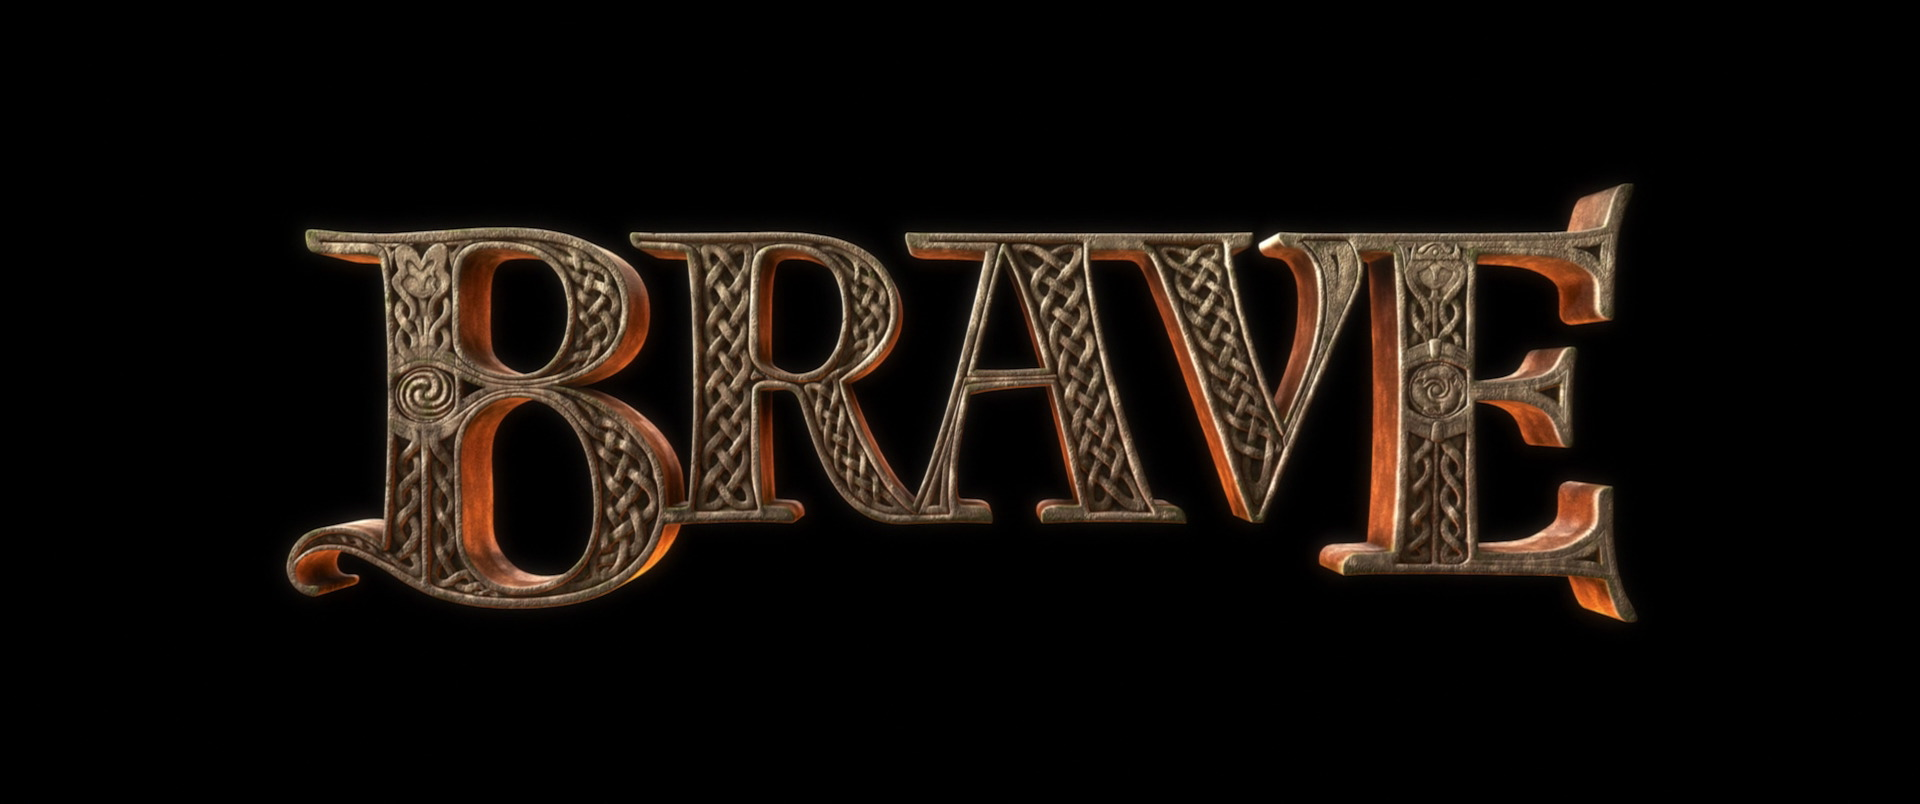 brave 1.52.126 for ios download